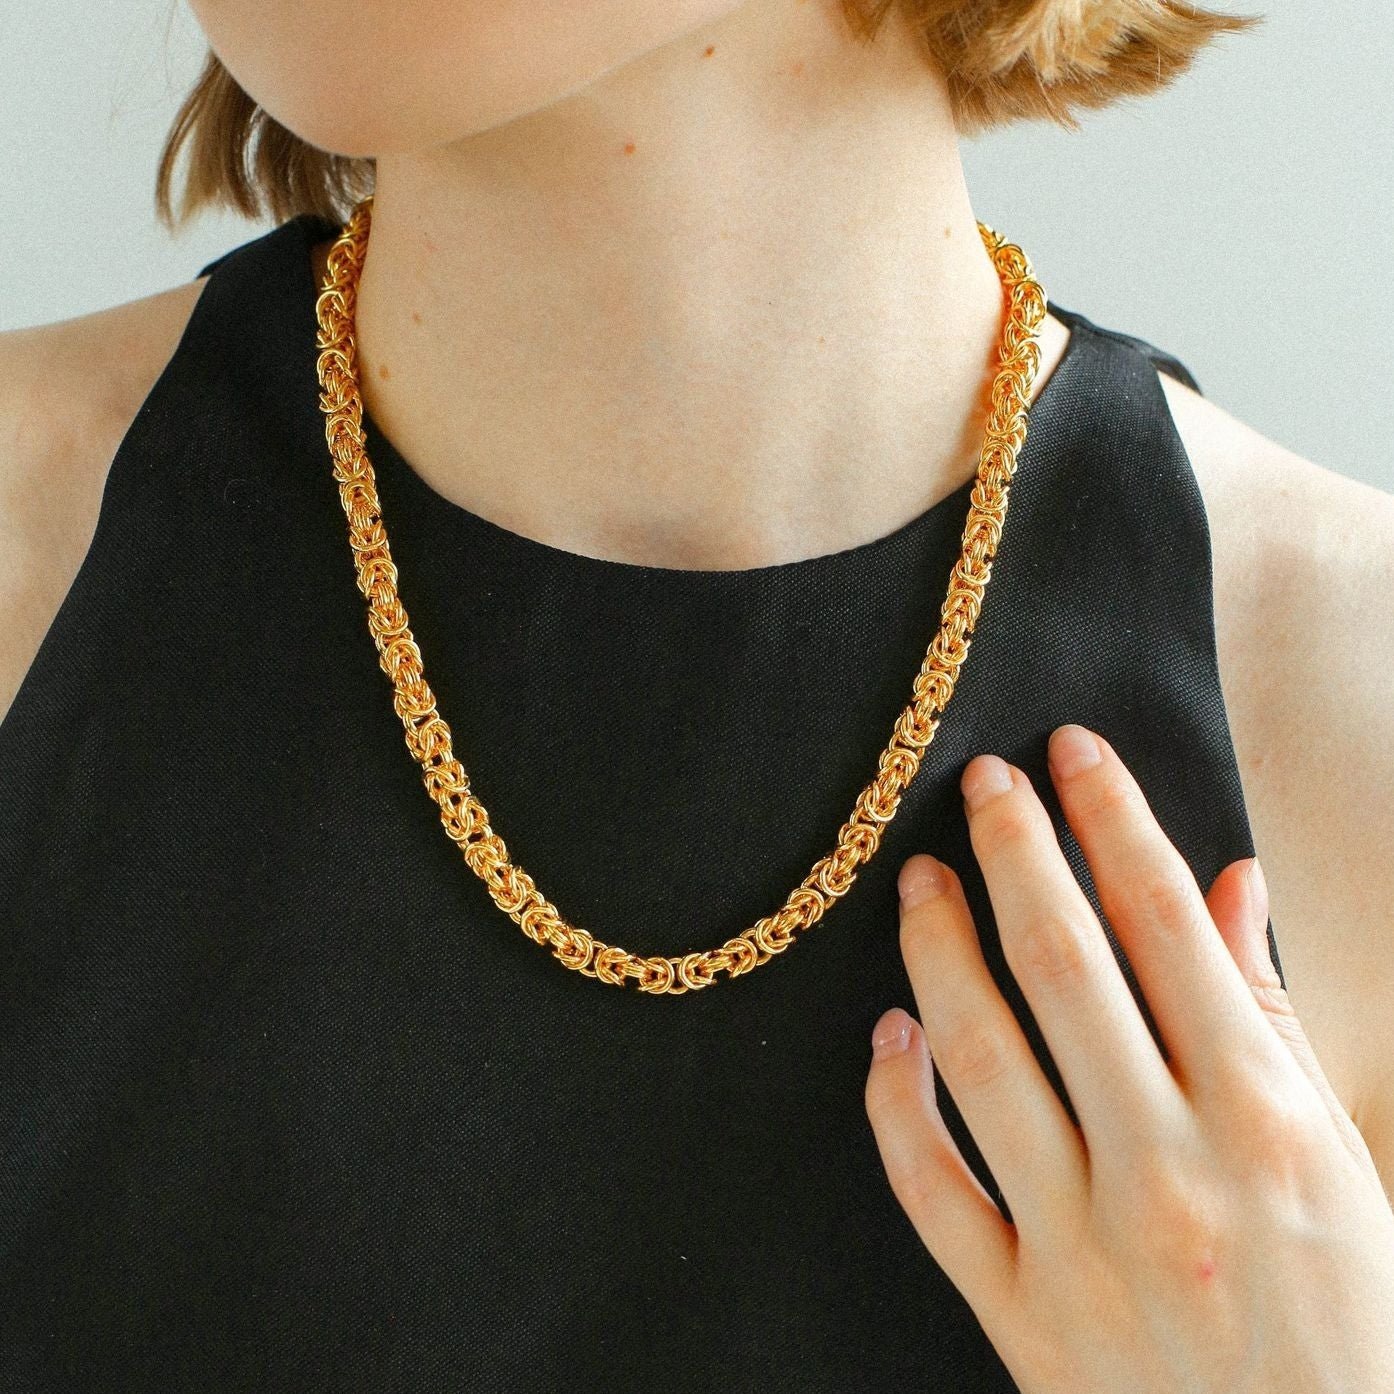 Fashionable Handcrafted Artisan Chunky Chain Necklace - floysun